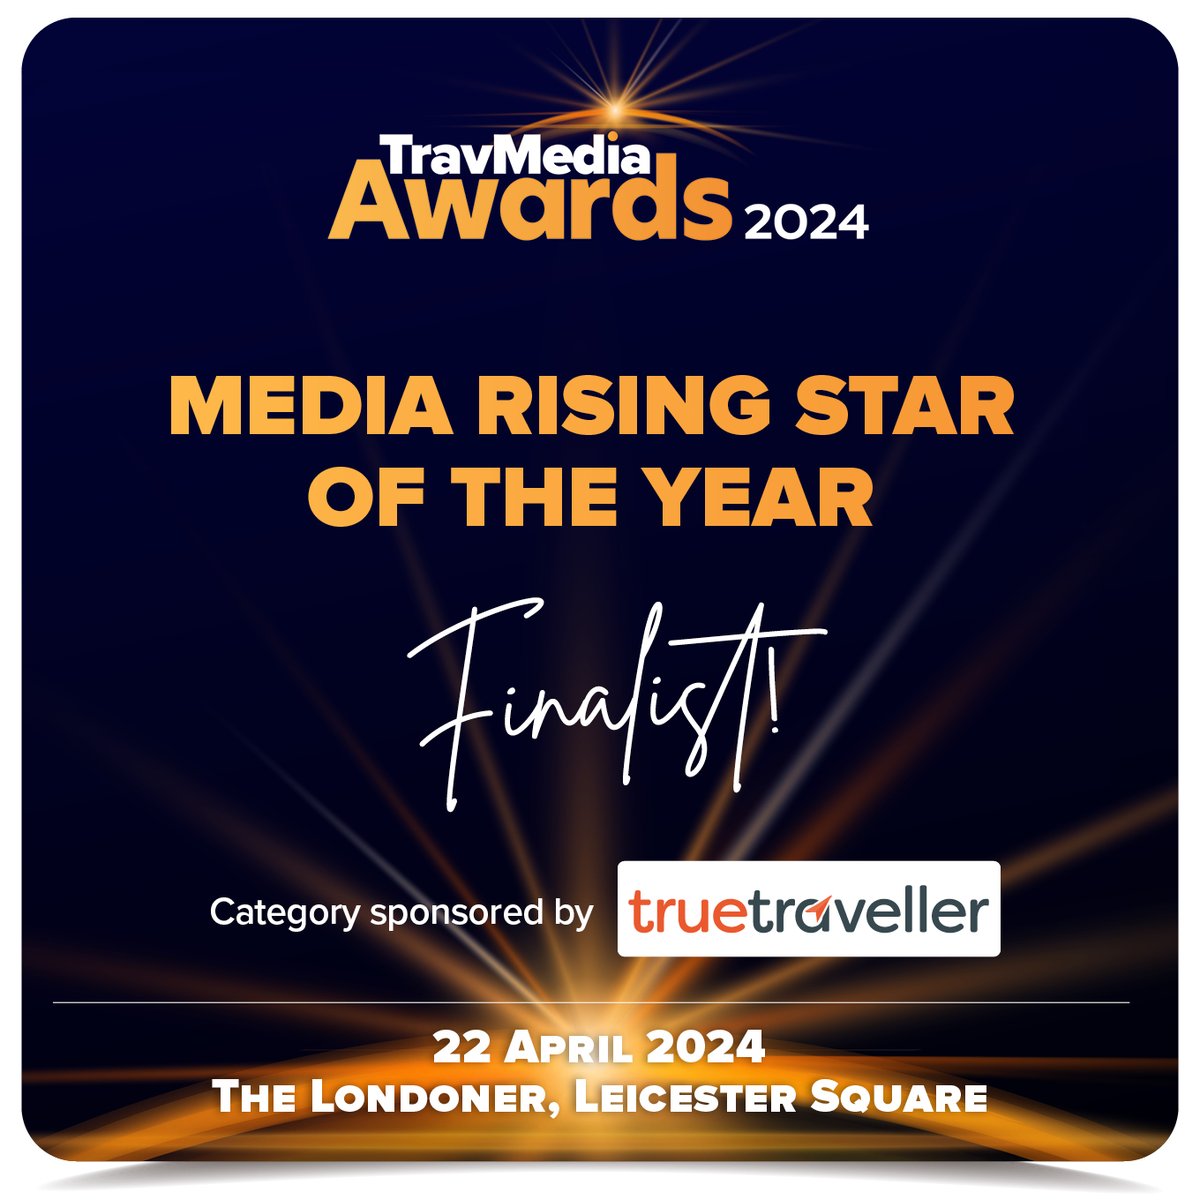 I know I'm old and it feels like I've been around for years, but I actually only had my first article and photos published in a magazine in 2022. So I'm chuffed to bits to be a finalist for Rising Star of the Year (for the 2nd year running!) at the #TravMediaAwards 🥳